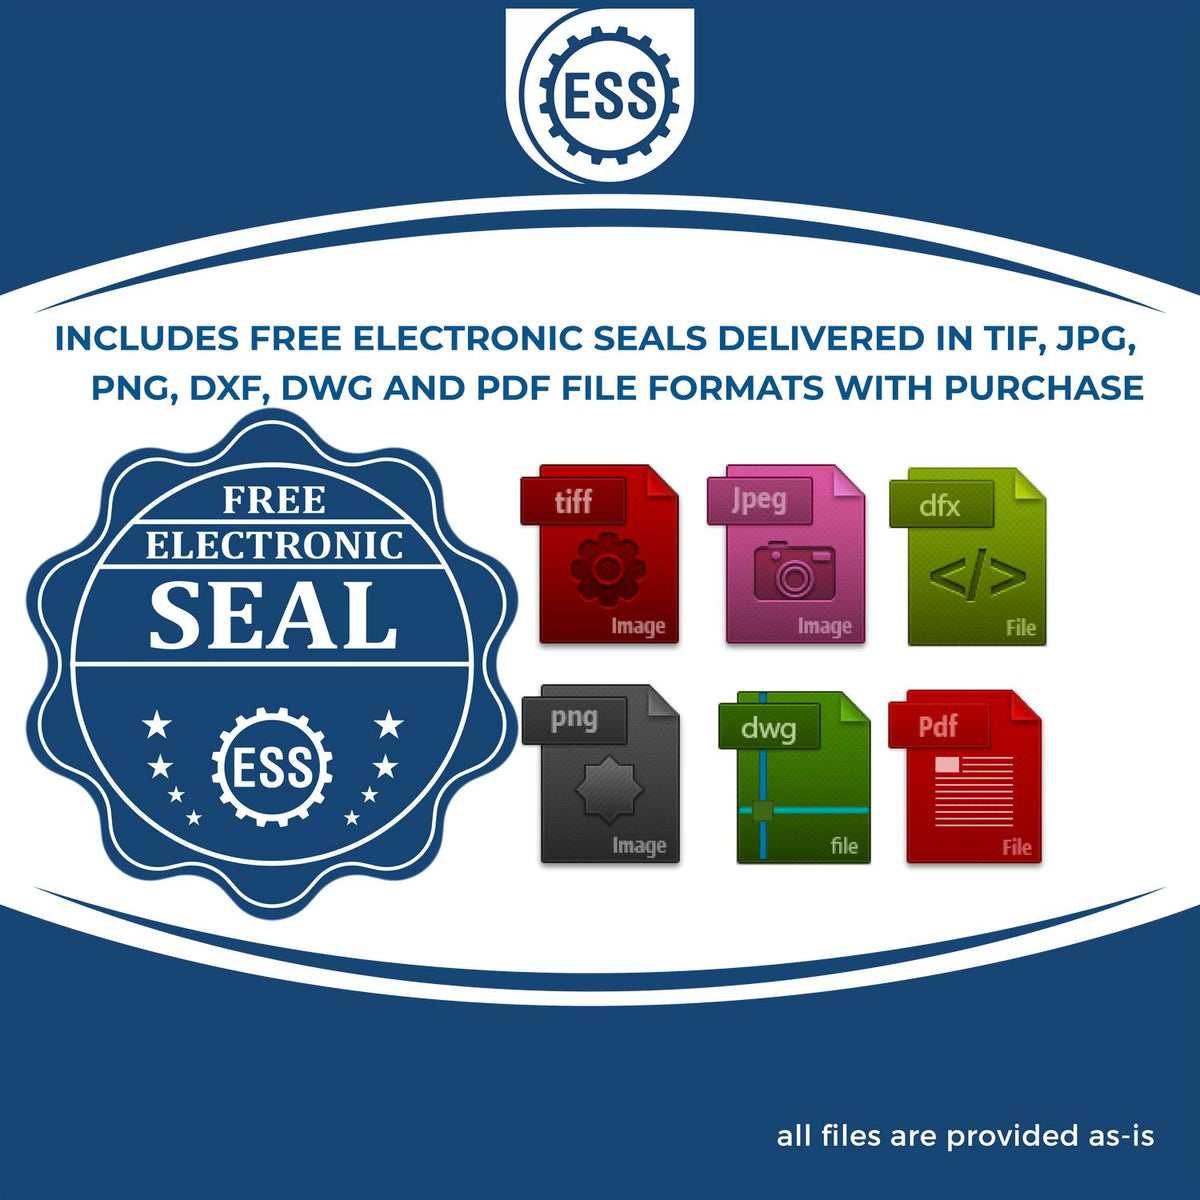 An infographic for the free electronic seal for the Slim Pre-Inked Vermont Professional Geologist Seal Stamp illustrating the different file type icons such as DXF, DWG, TIF, JPG and PNG.